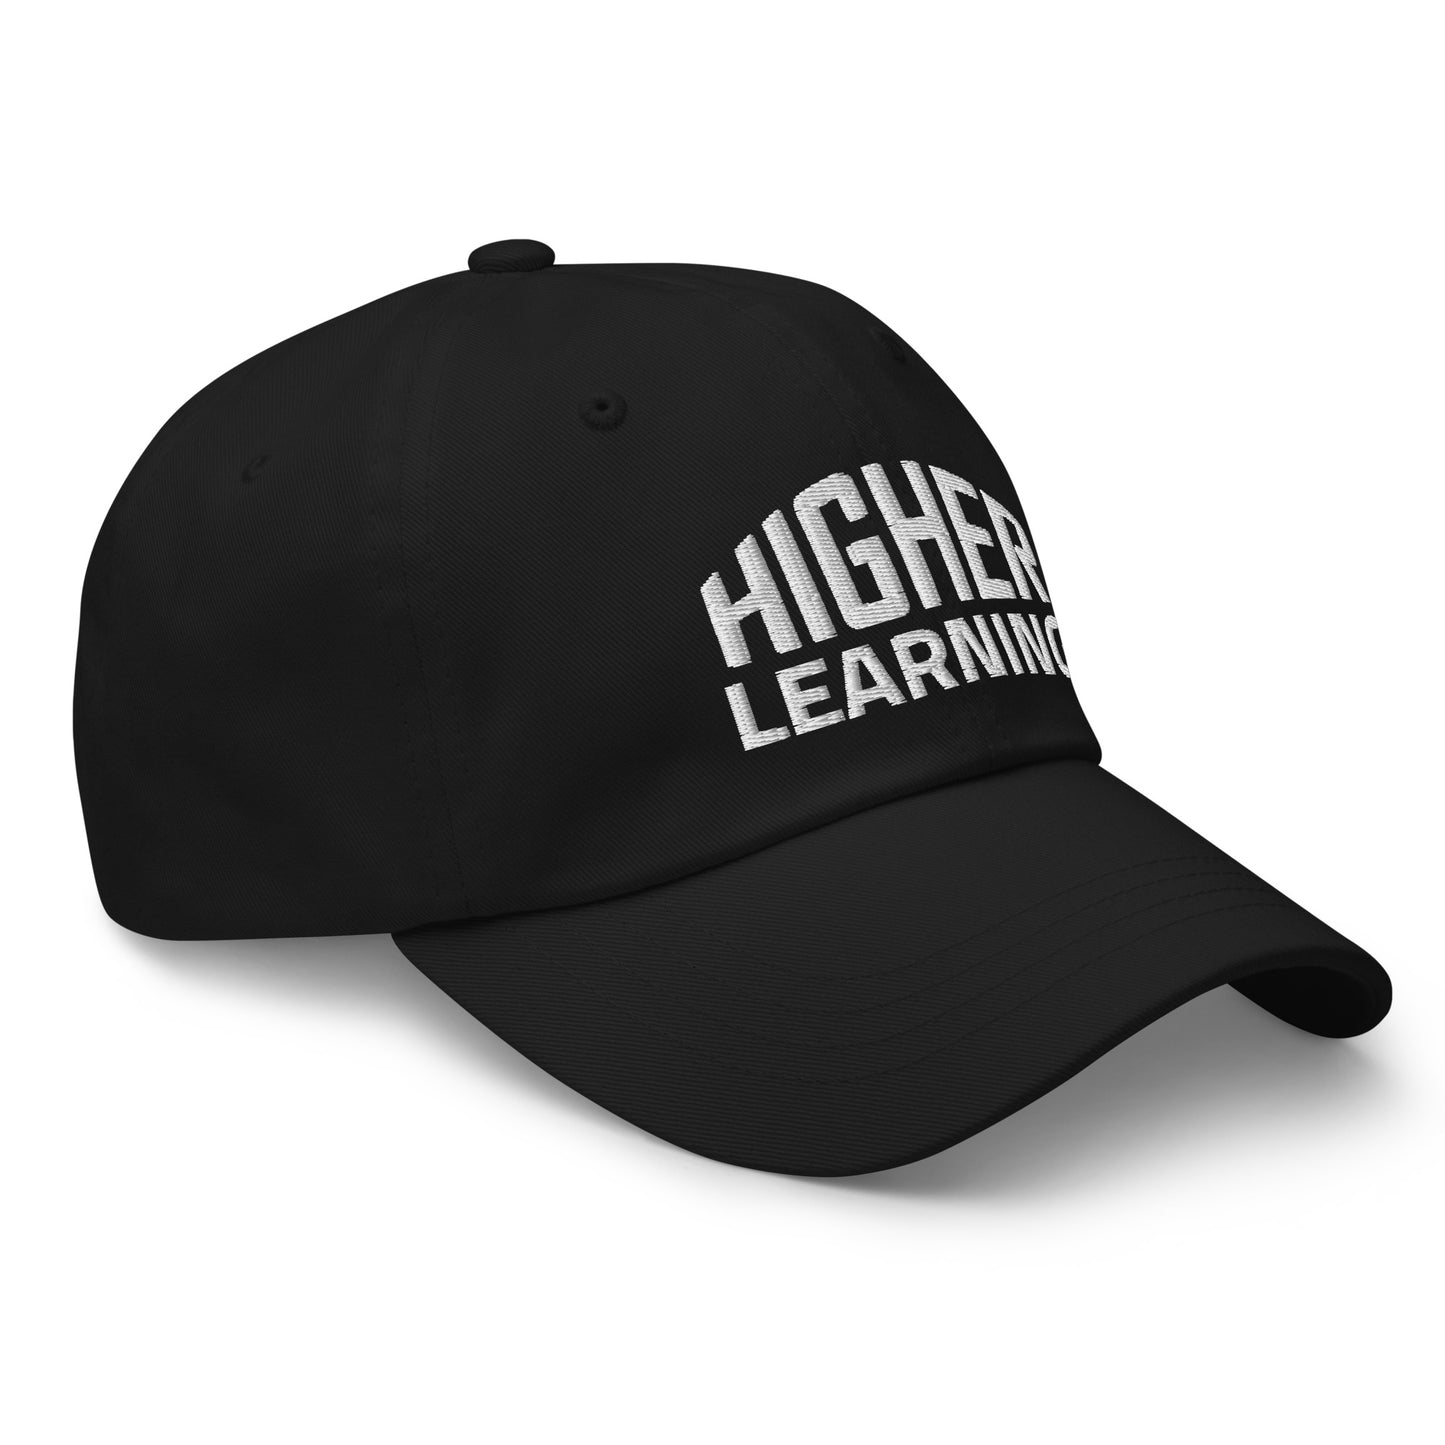 Higher Learning Hat